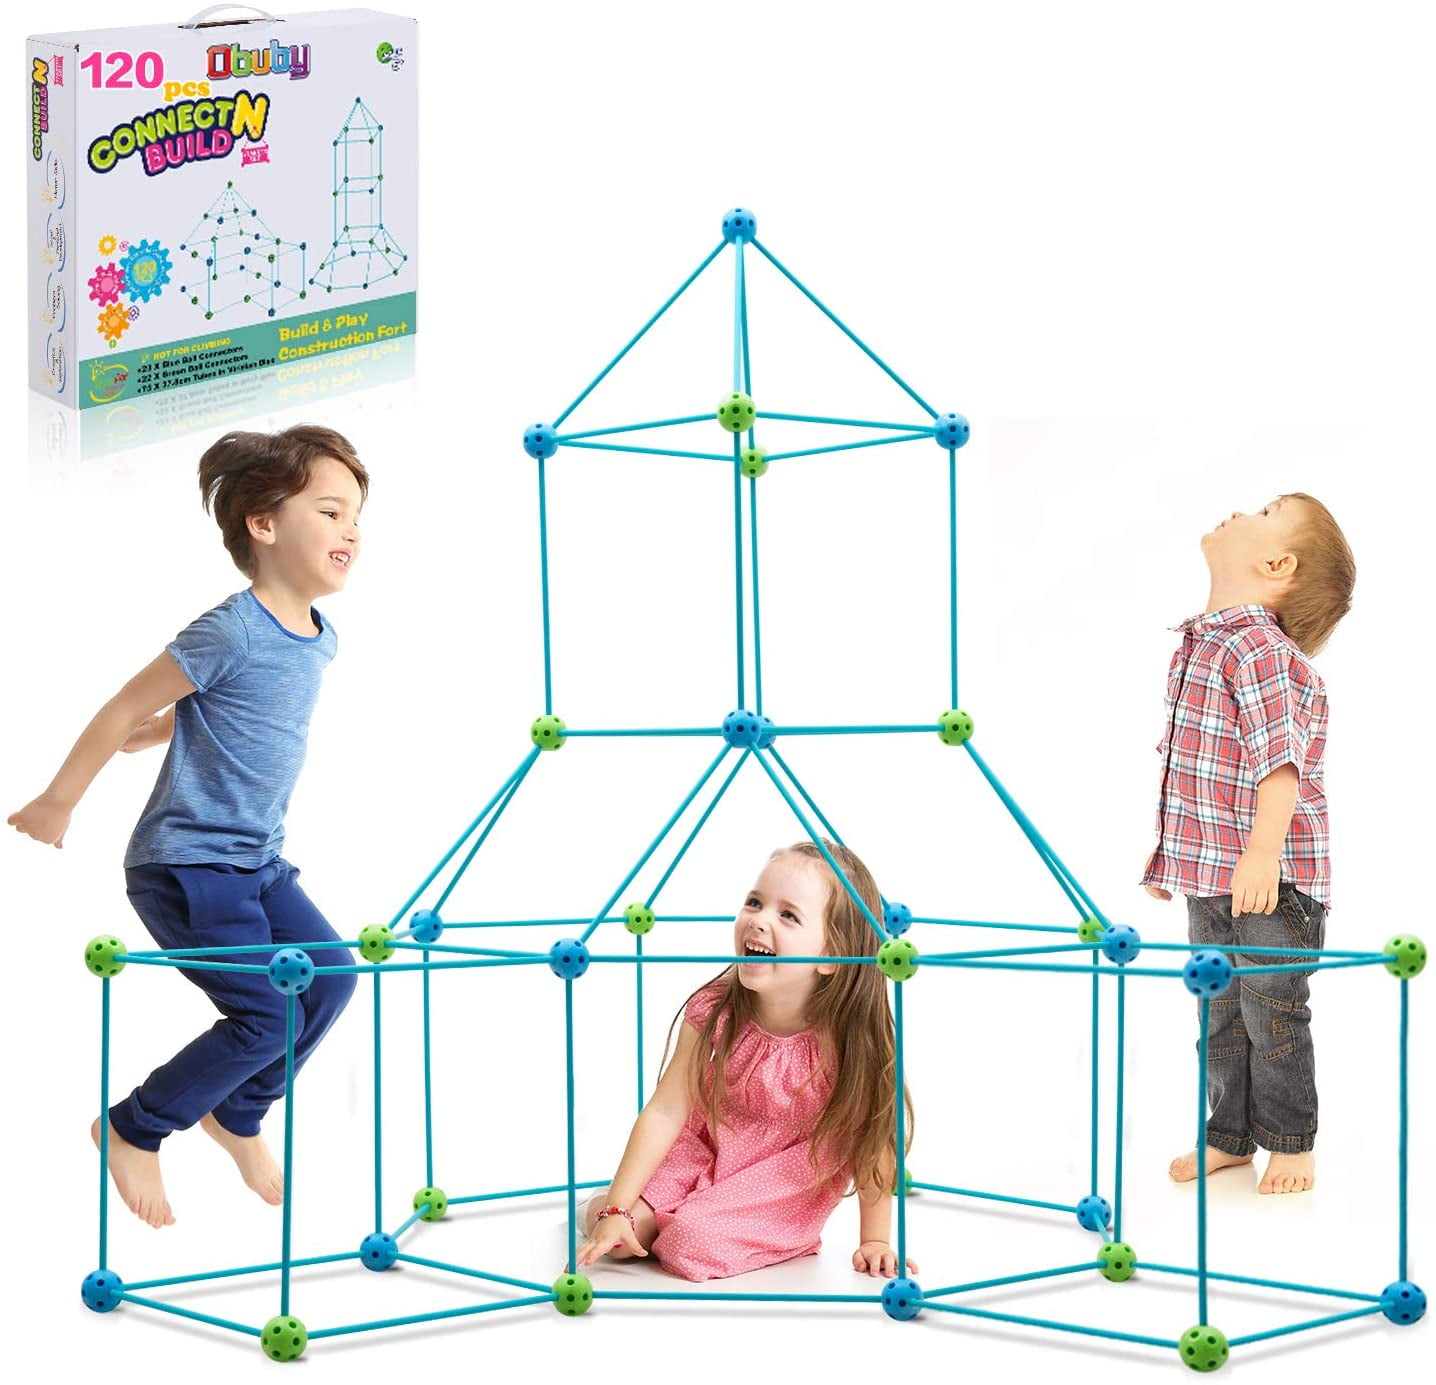 Encourages Imagination & Teamwork Fun Construction Toy STEM Building Toys Play Tent Fort Kit with 216 Pcs Foldable Playhouse Toy Creative Play Zixar Construction Fort Building Kits for Kids 